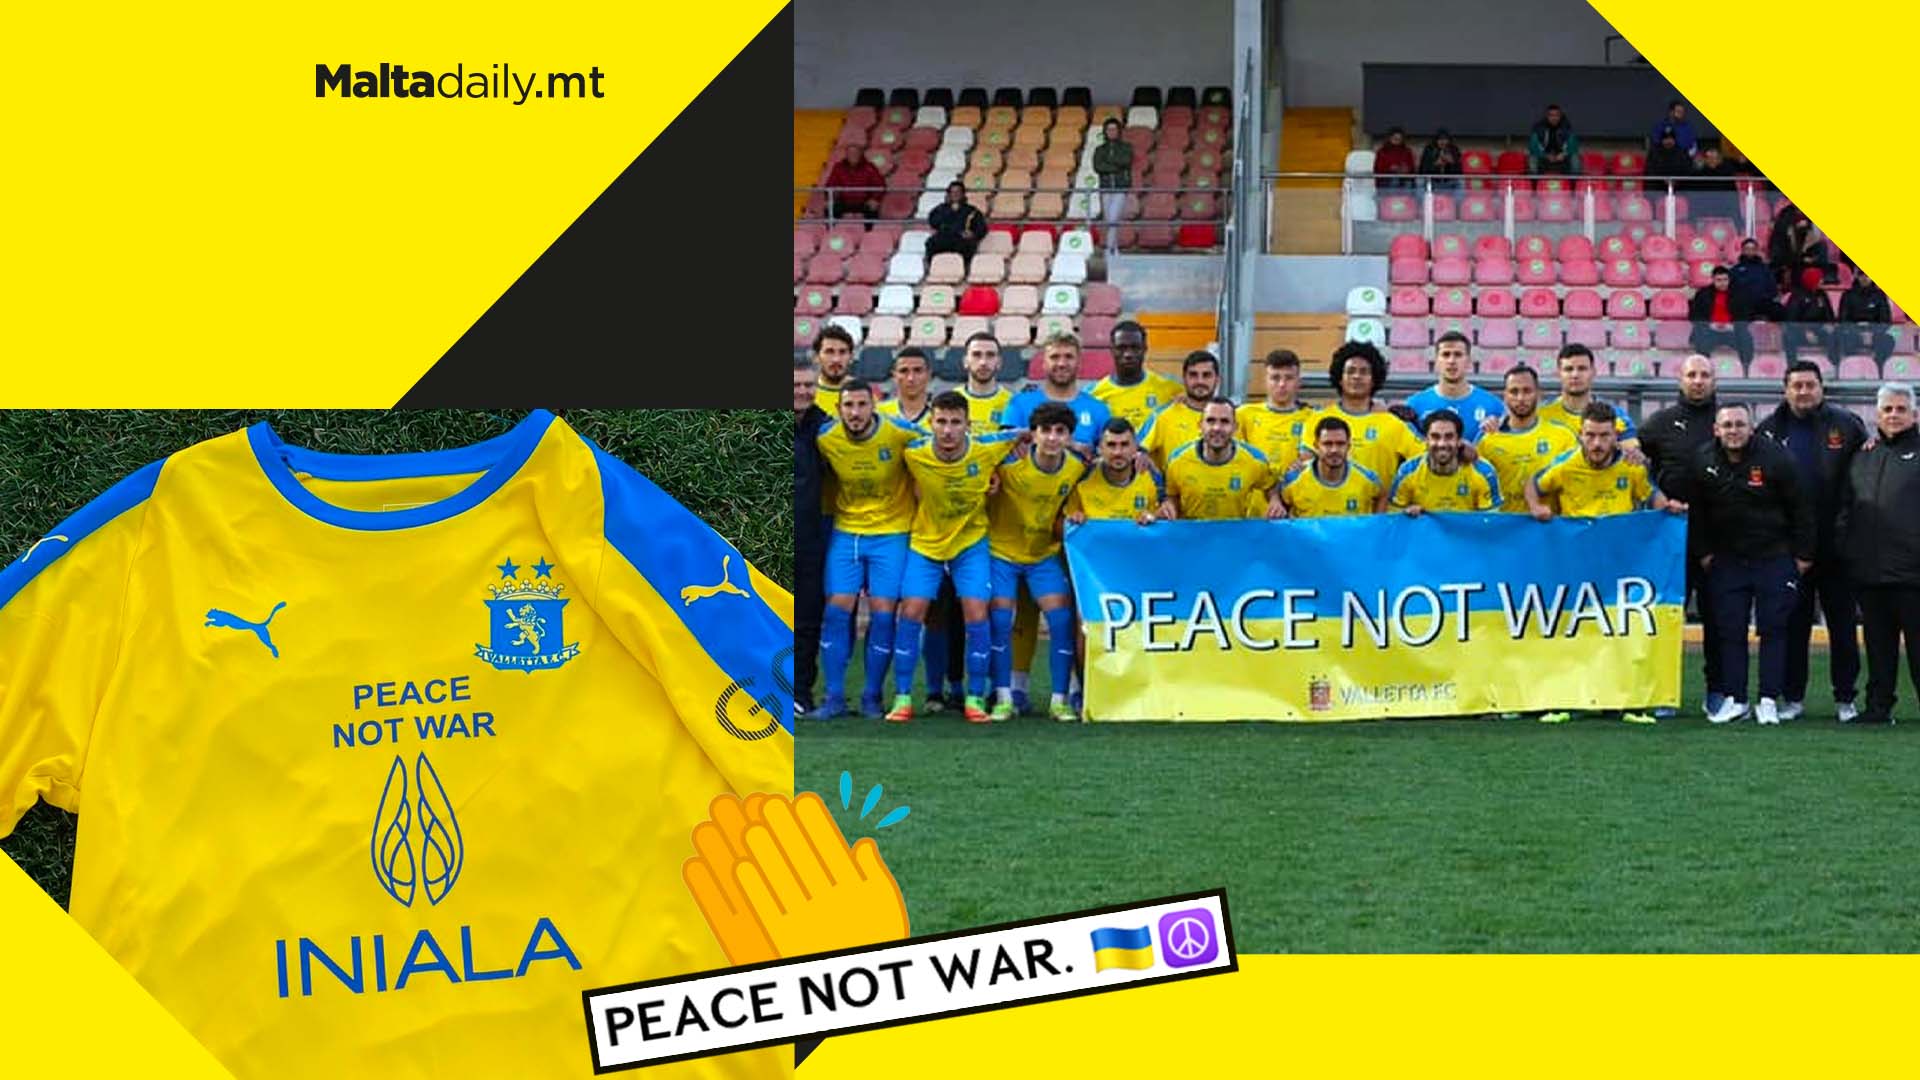 Valletta FC’s new kit in support of Ukraine is up for sale to raise funds